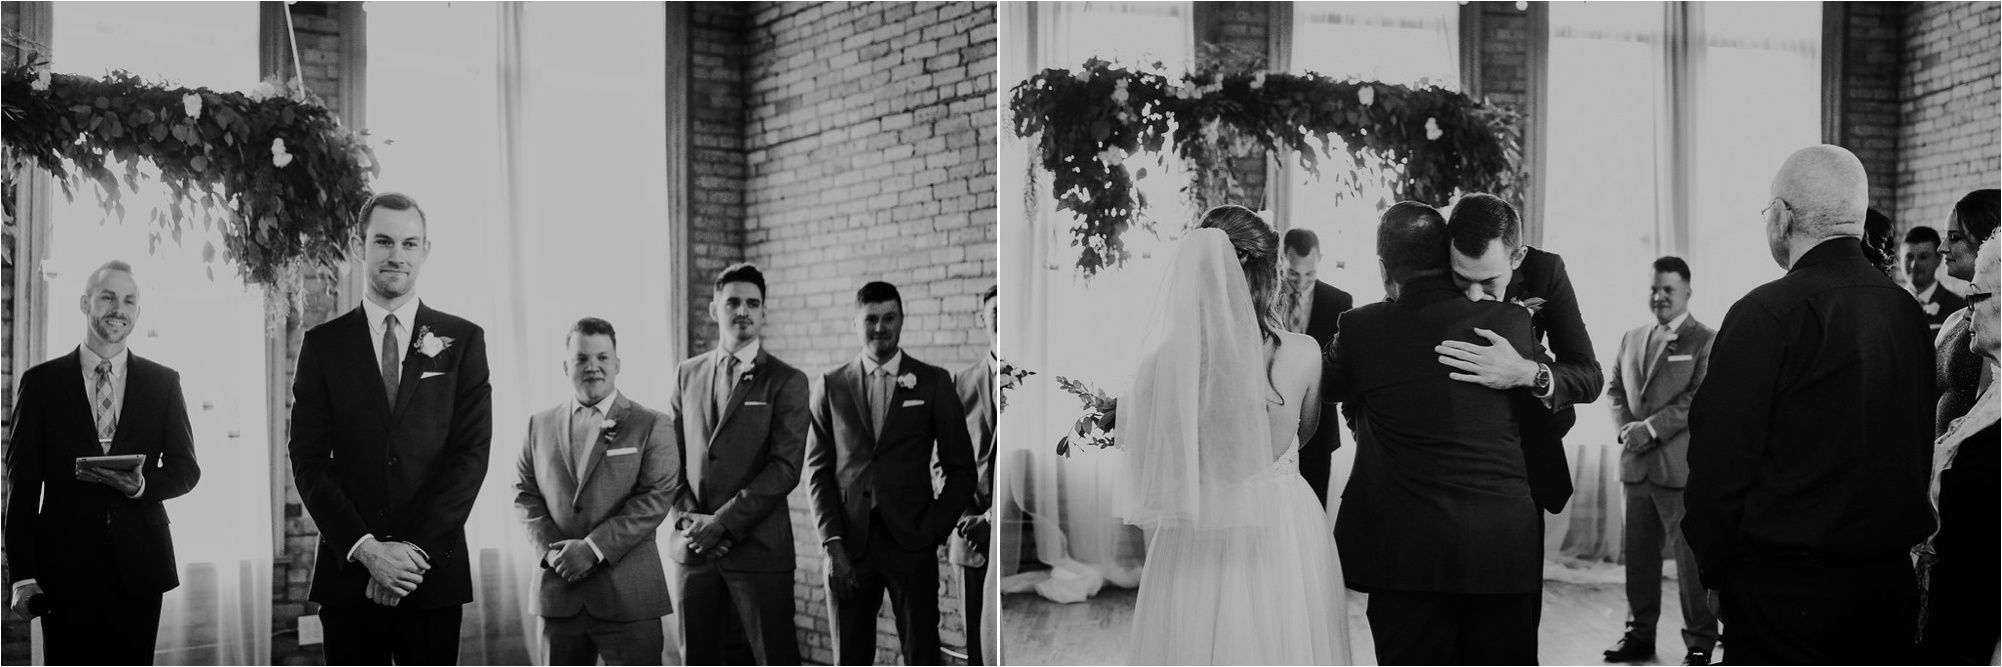 Hewing Hotel and Day Block Event Center Minneapolis Wedding Photographer_2985.jpg